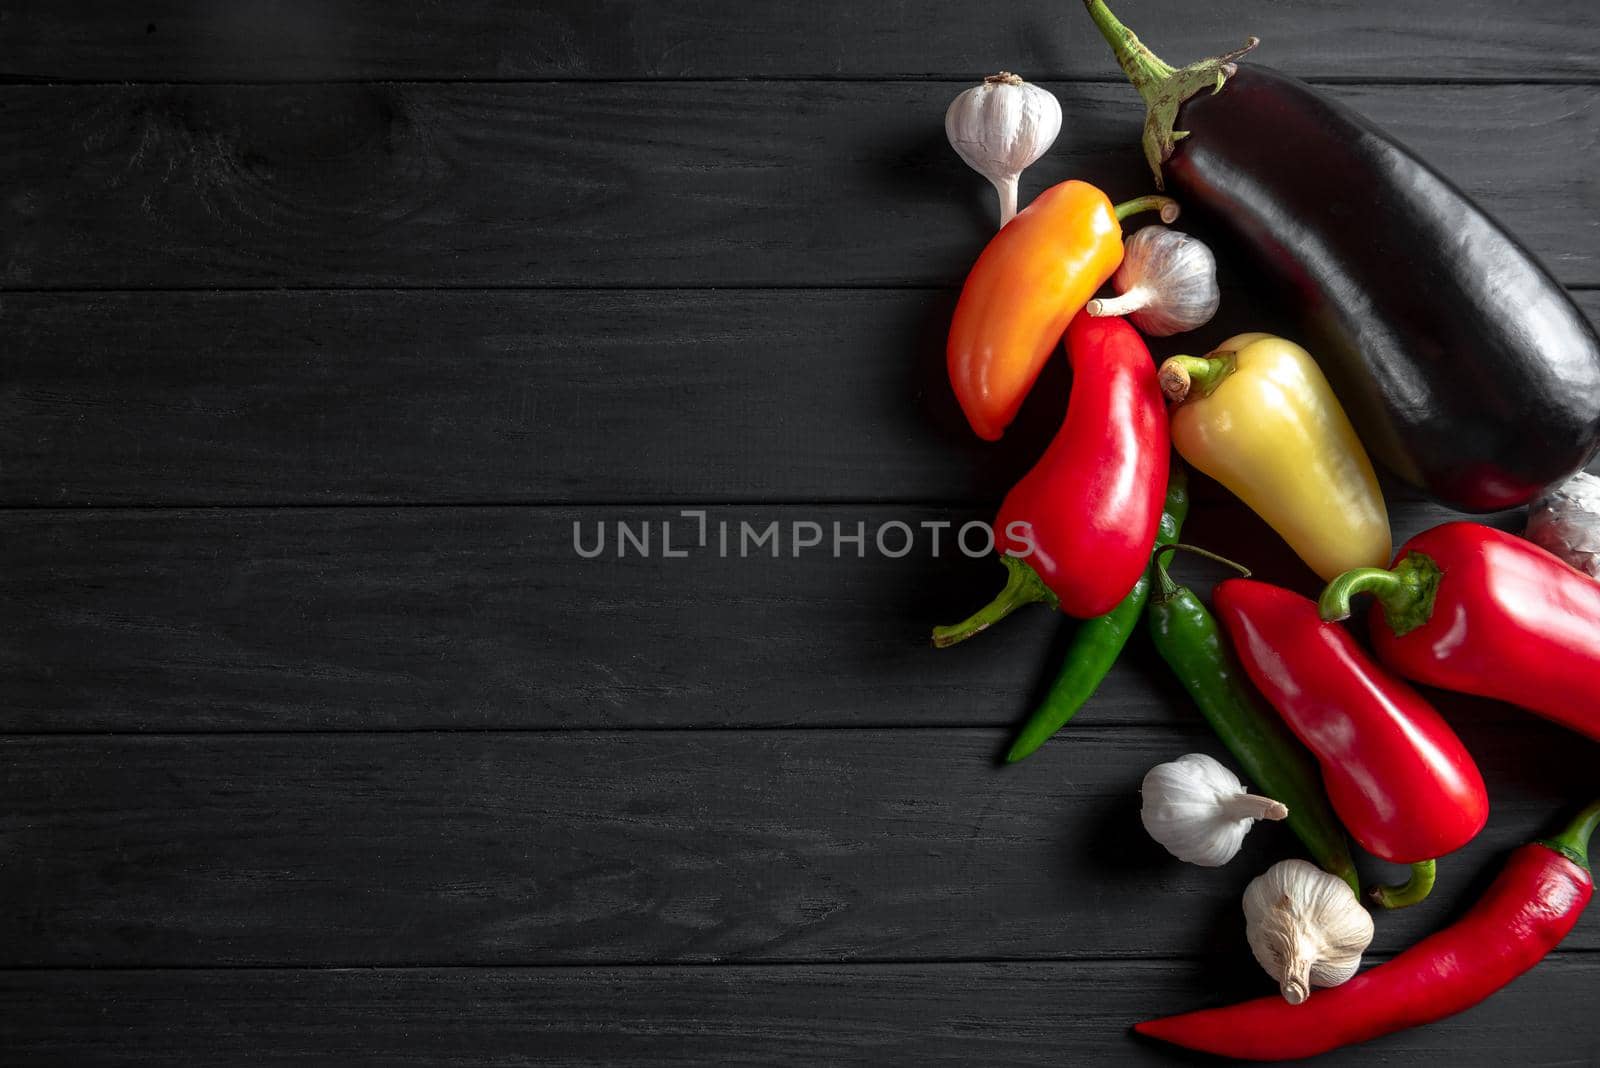 Vegetables on a black wooden background for a traditional Balkan dish called Ajvar by gulyaevstudio